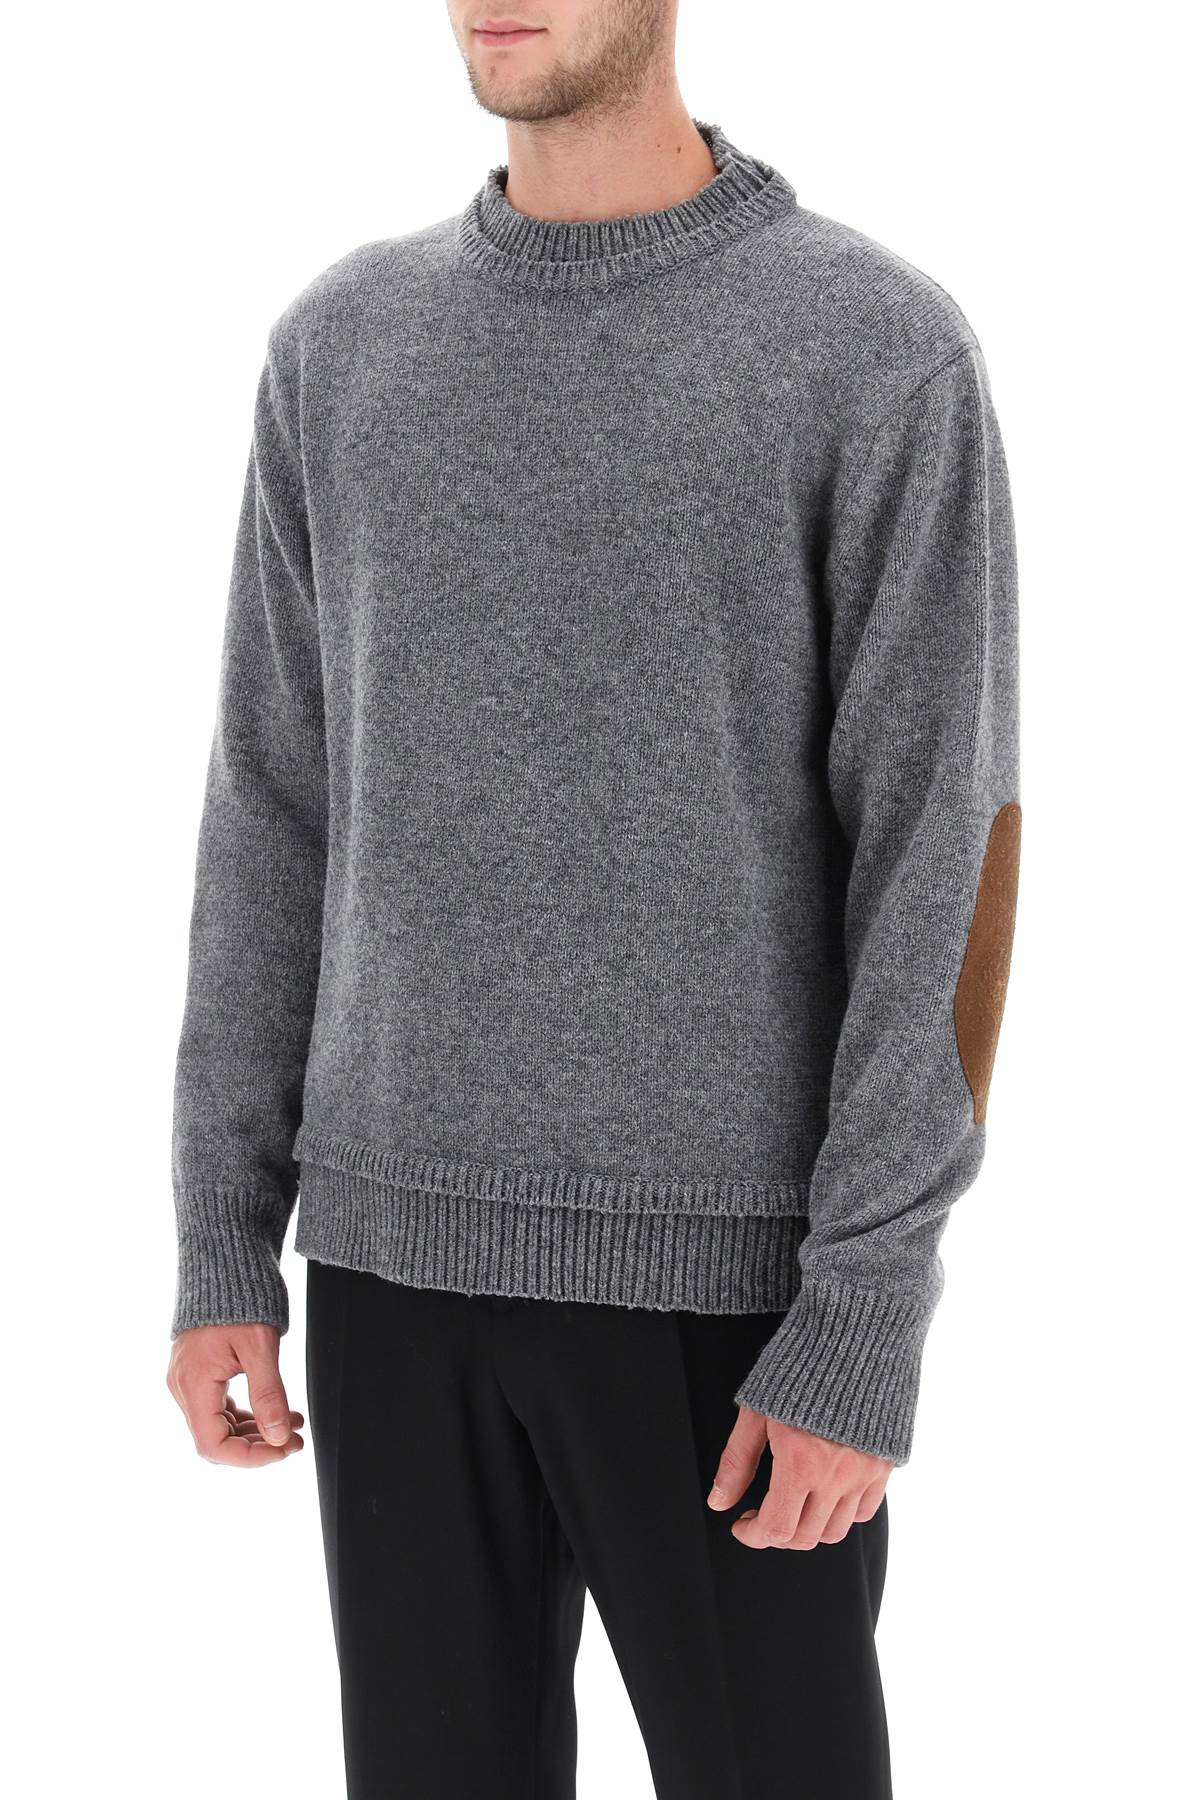 Maison margiela crew neck sweater with elbow patches-3